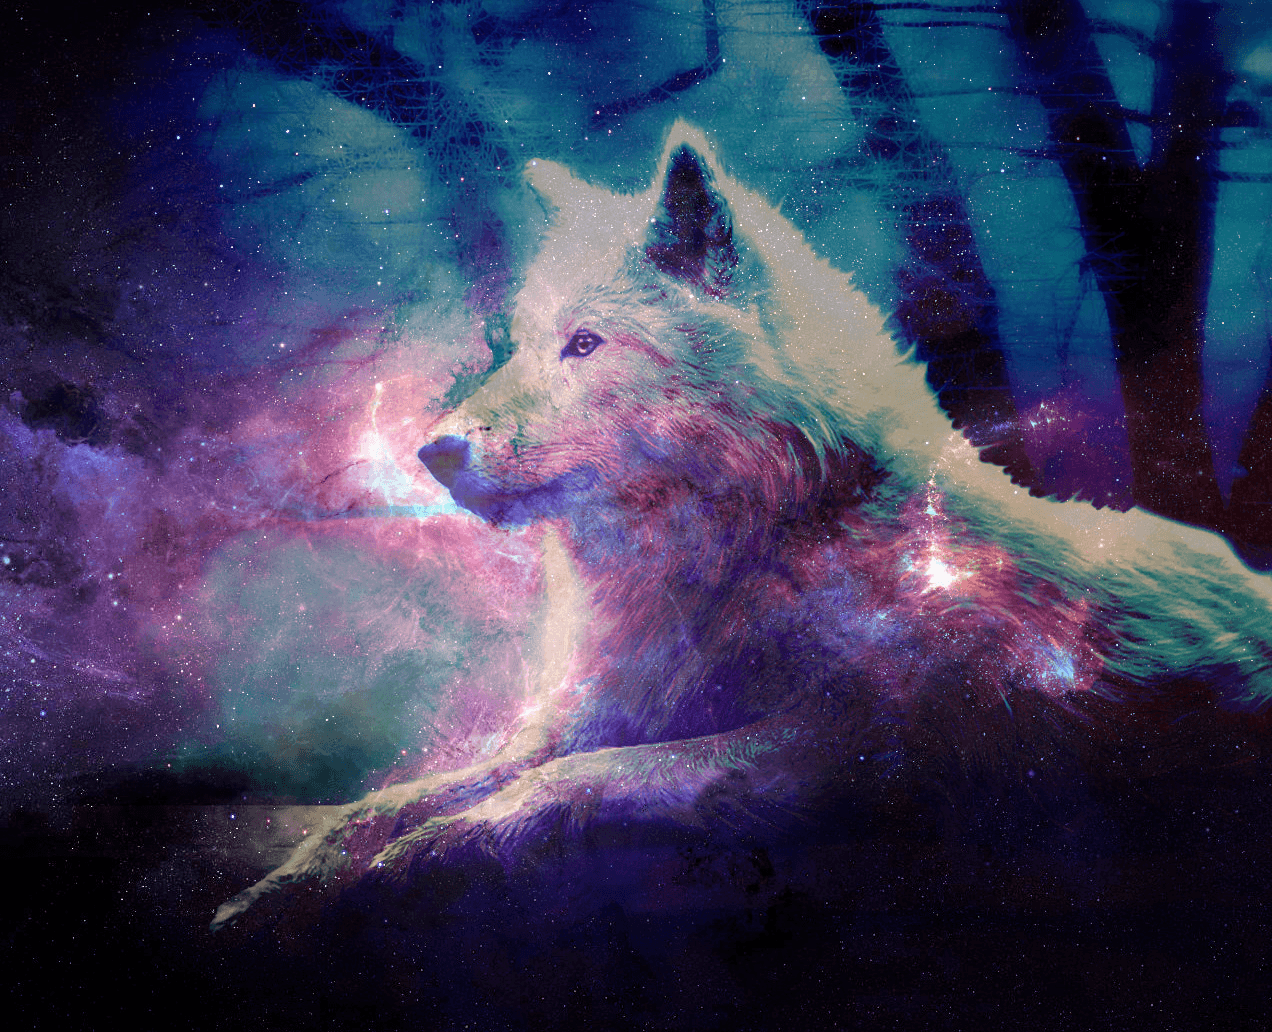 Cute Galaxy Wolf Wallpapers Top Free Cute Galaxy Wolf Backgrounds Wallpaperaccess Free wolf wallpapers and wolf backgrounds for your computer desktop. cute galaxy wolf wallpapers top free